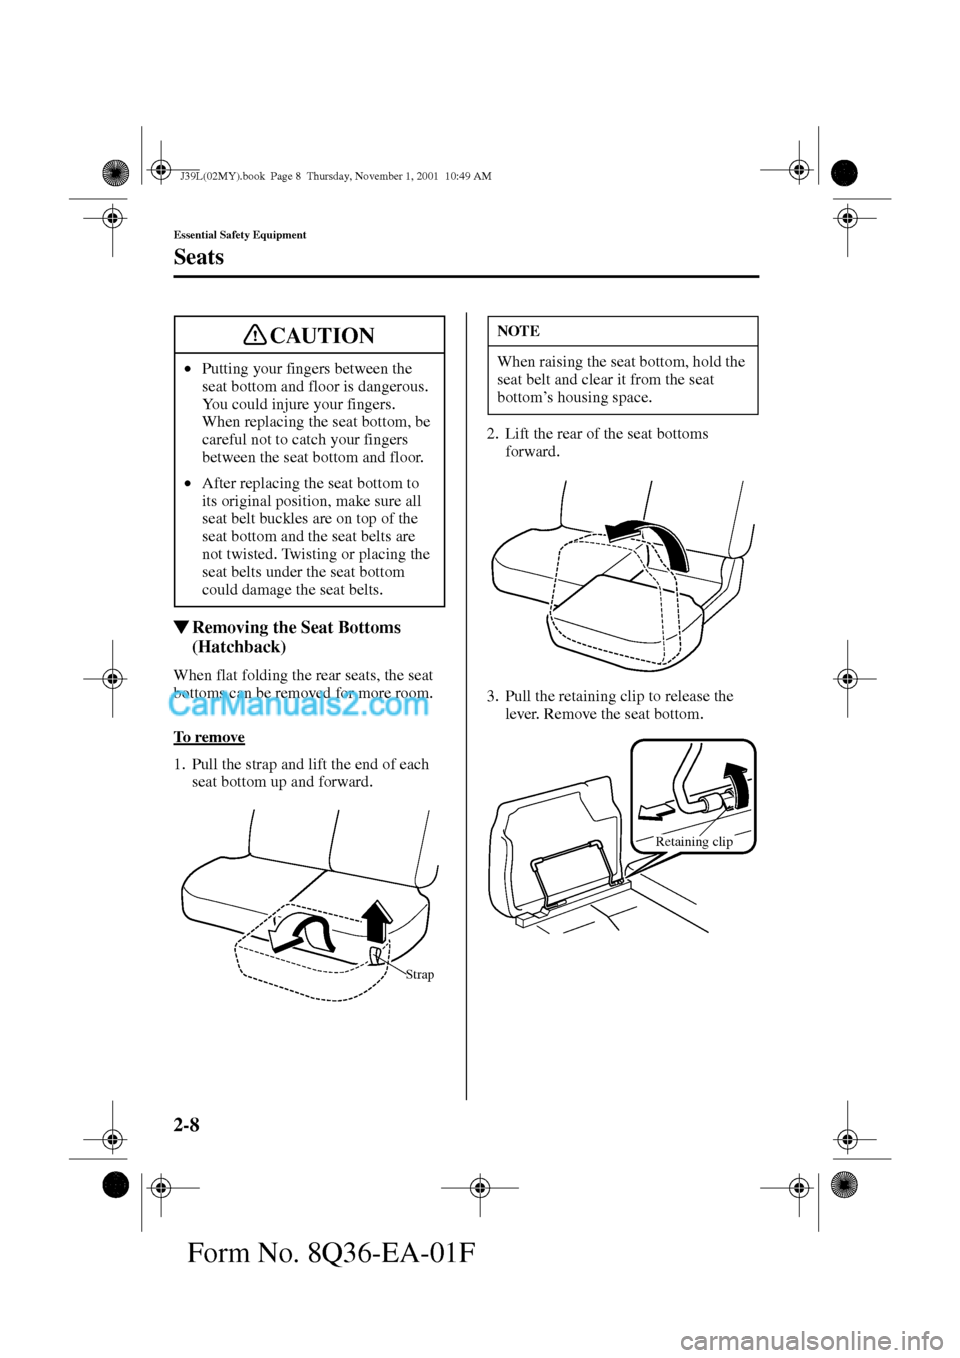 MAZDA MODEL PROTÉGÉ 2002   (in English) User Guide 2-8
Essential Safety Equipment
Seats
Form No. 8Q36-EA-01F
Removing the Seat Bottoms 
(Hatchback)
When flat folding the rear seats, the seat 
bottoms can be removed for more room.
To  r e m o v e
1. P